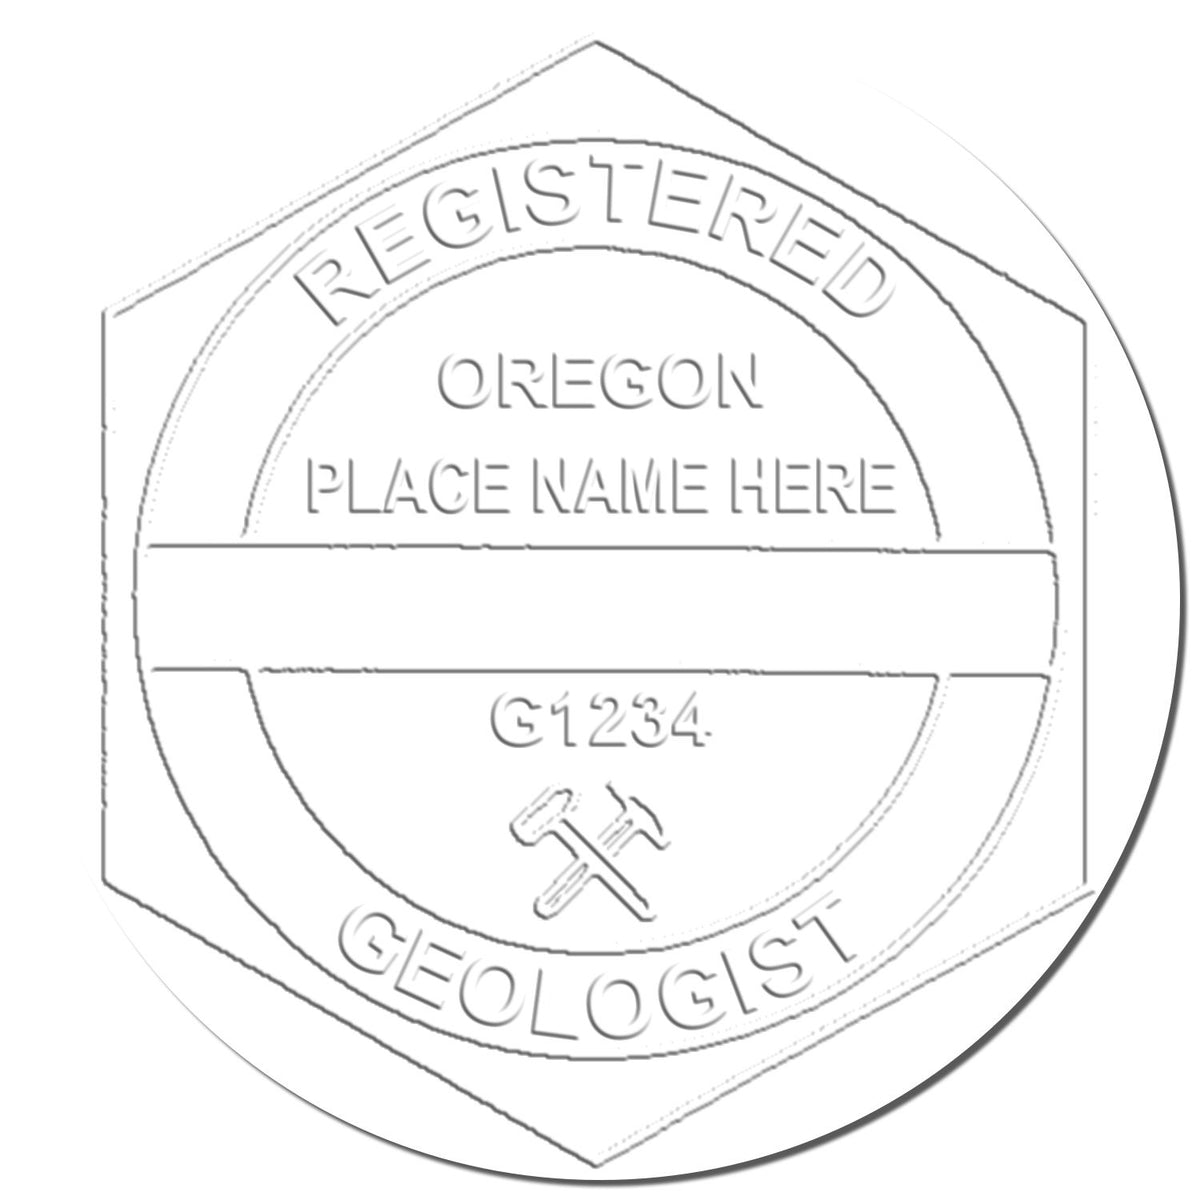 A photograph of the Hybrid Oregon Geologist Seal stamp impression reveals a vivid, professional image of the on paper.